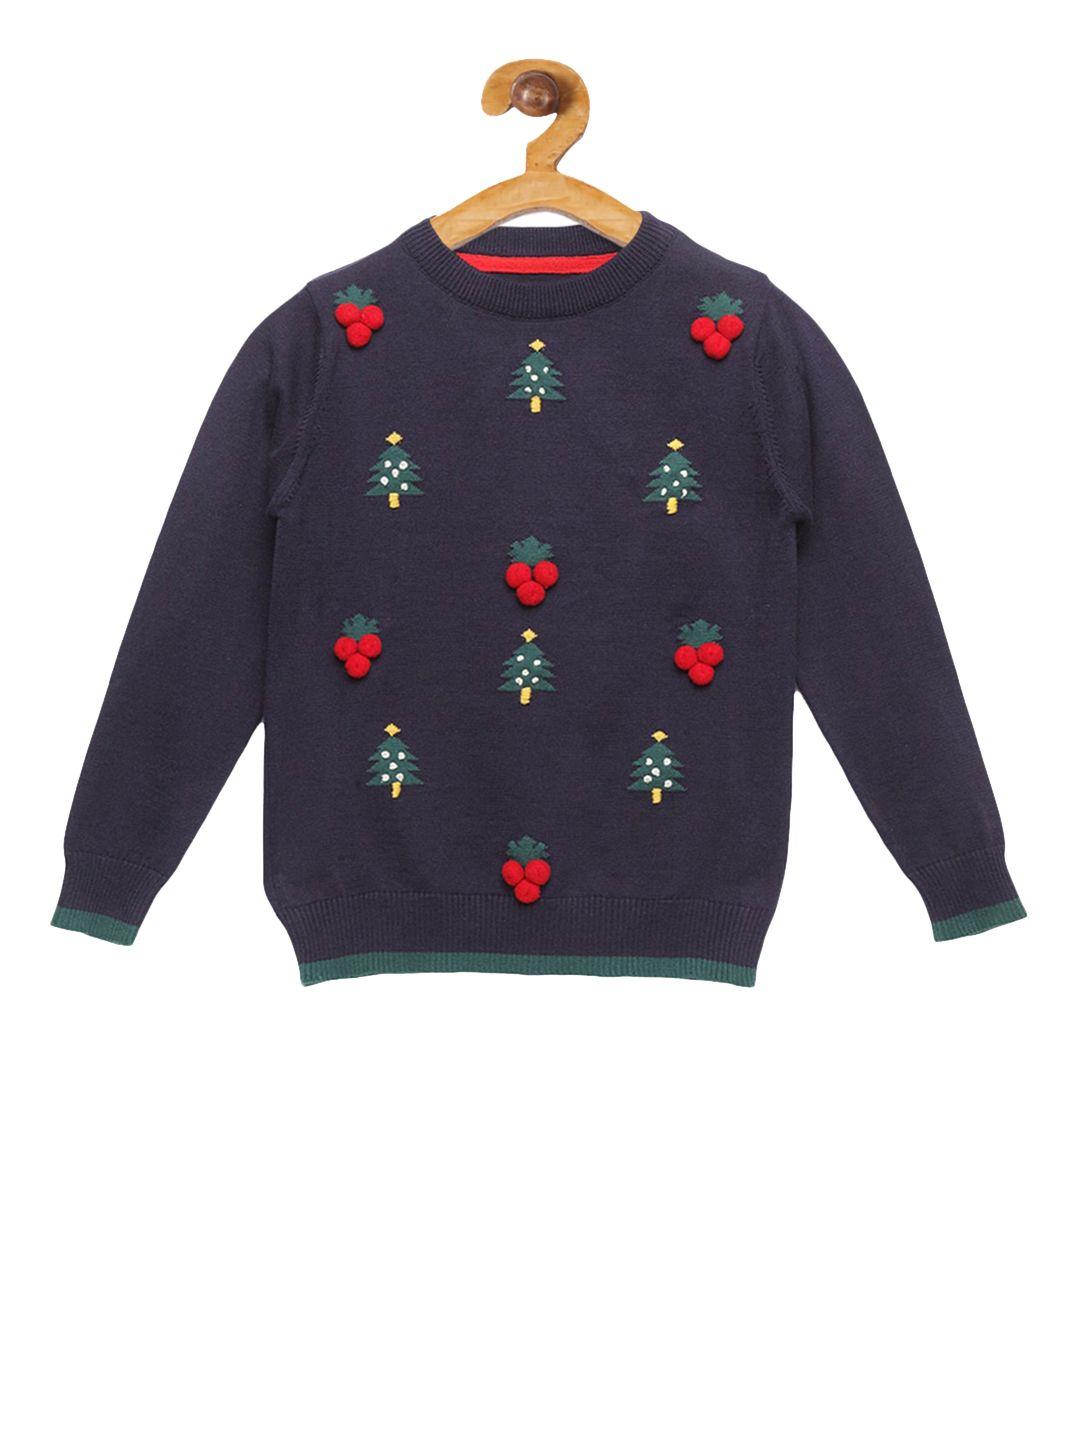 cherry crumble infant boys navy blue & green embroidered pullover sweater